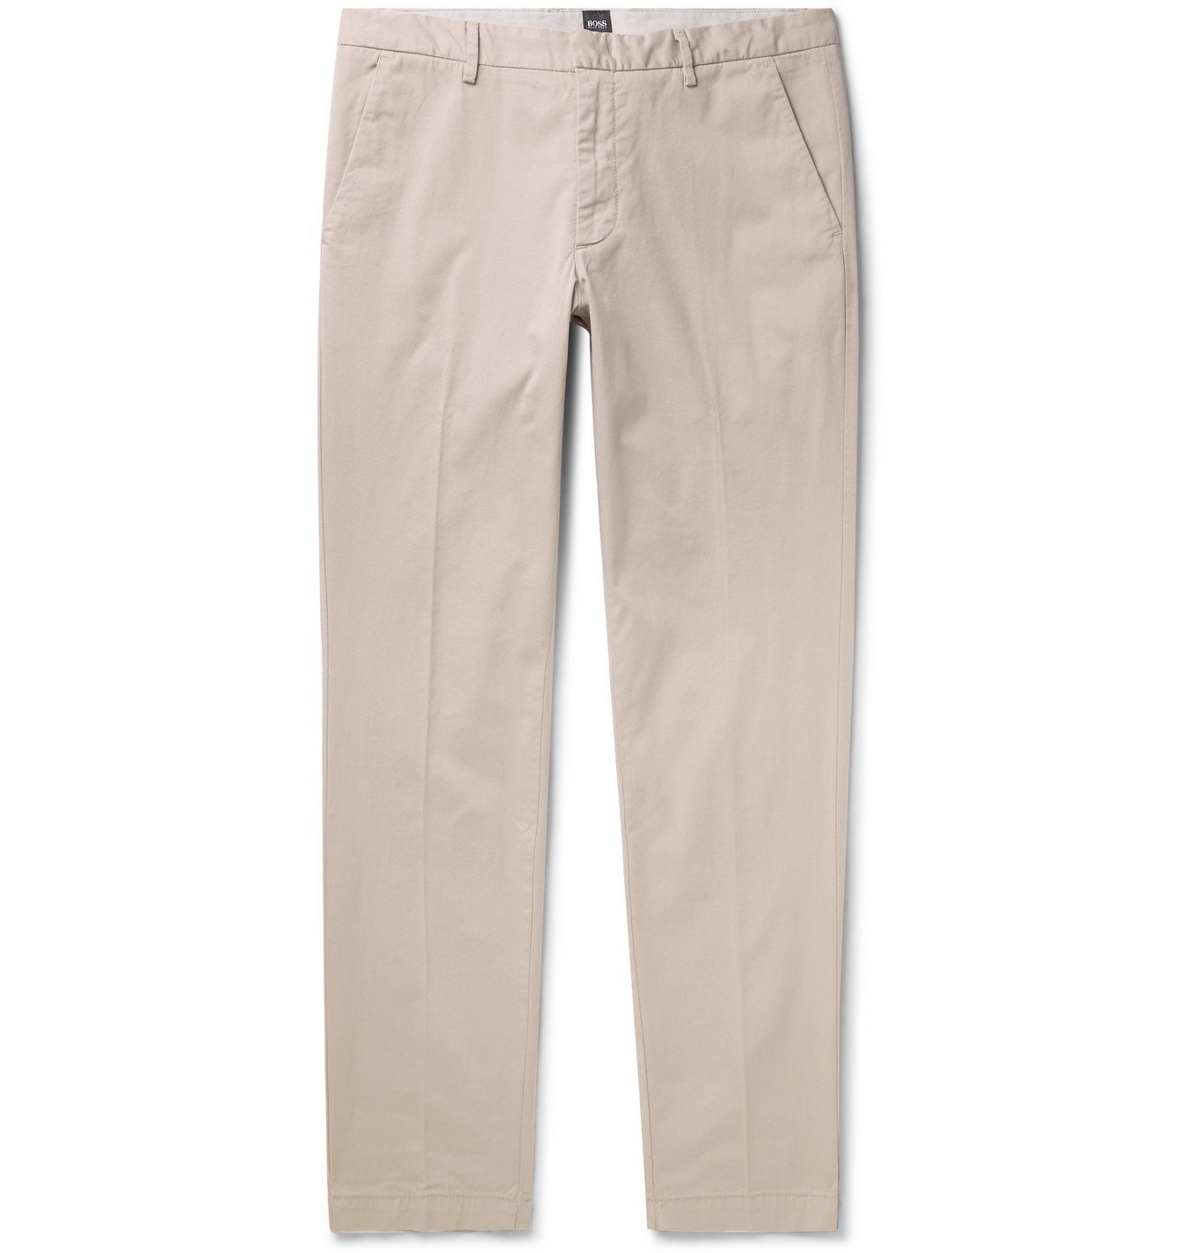 HUGO - Relaxed-fit trousers in soft twill